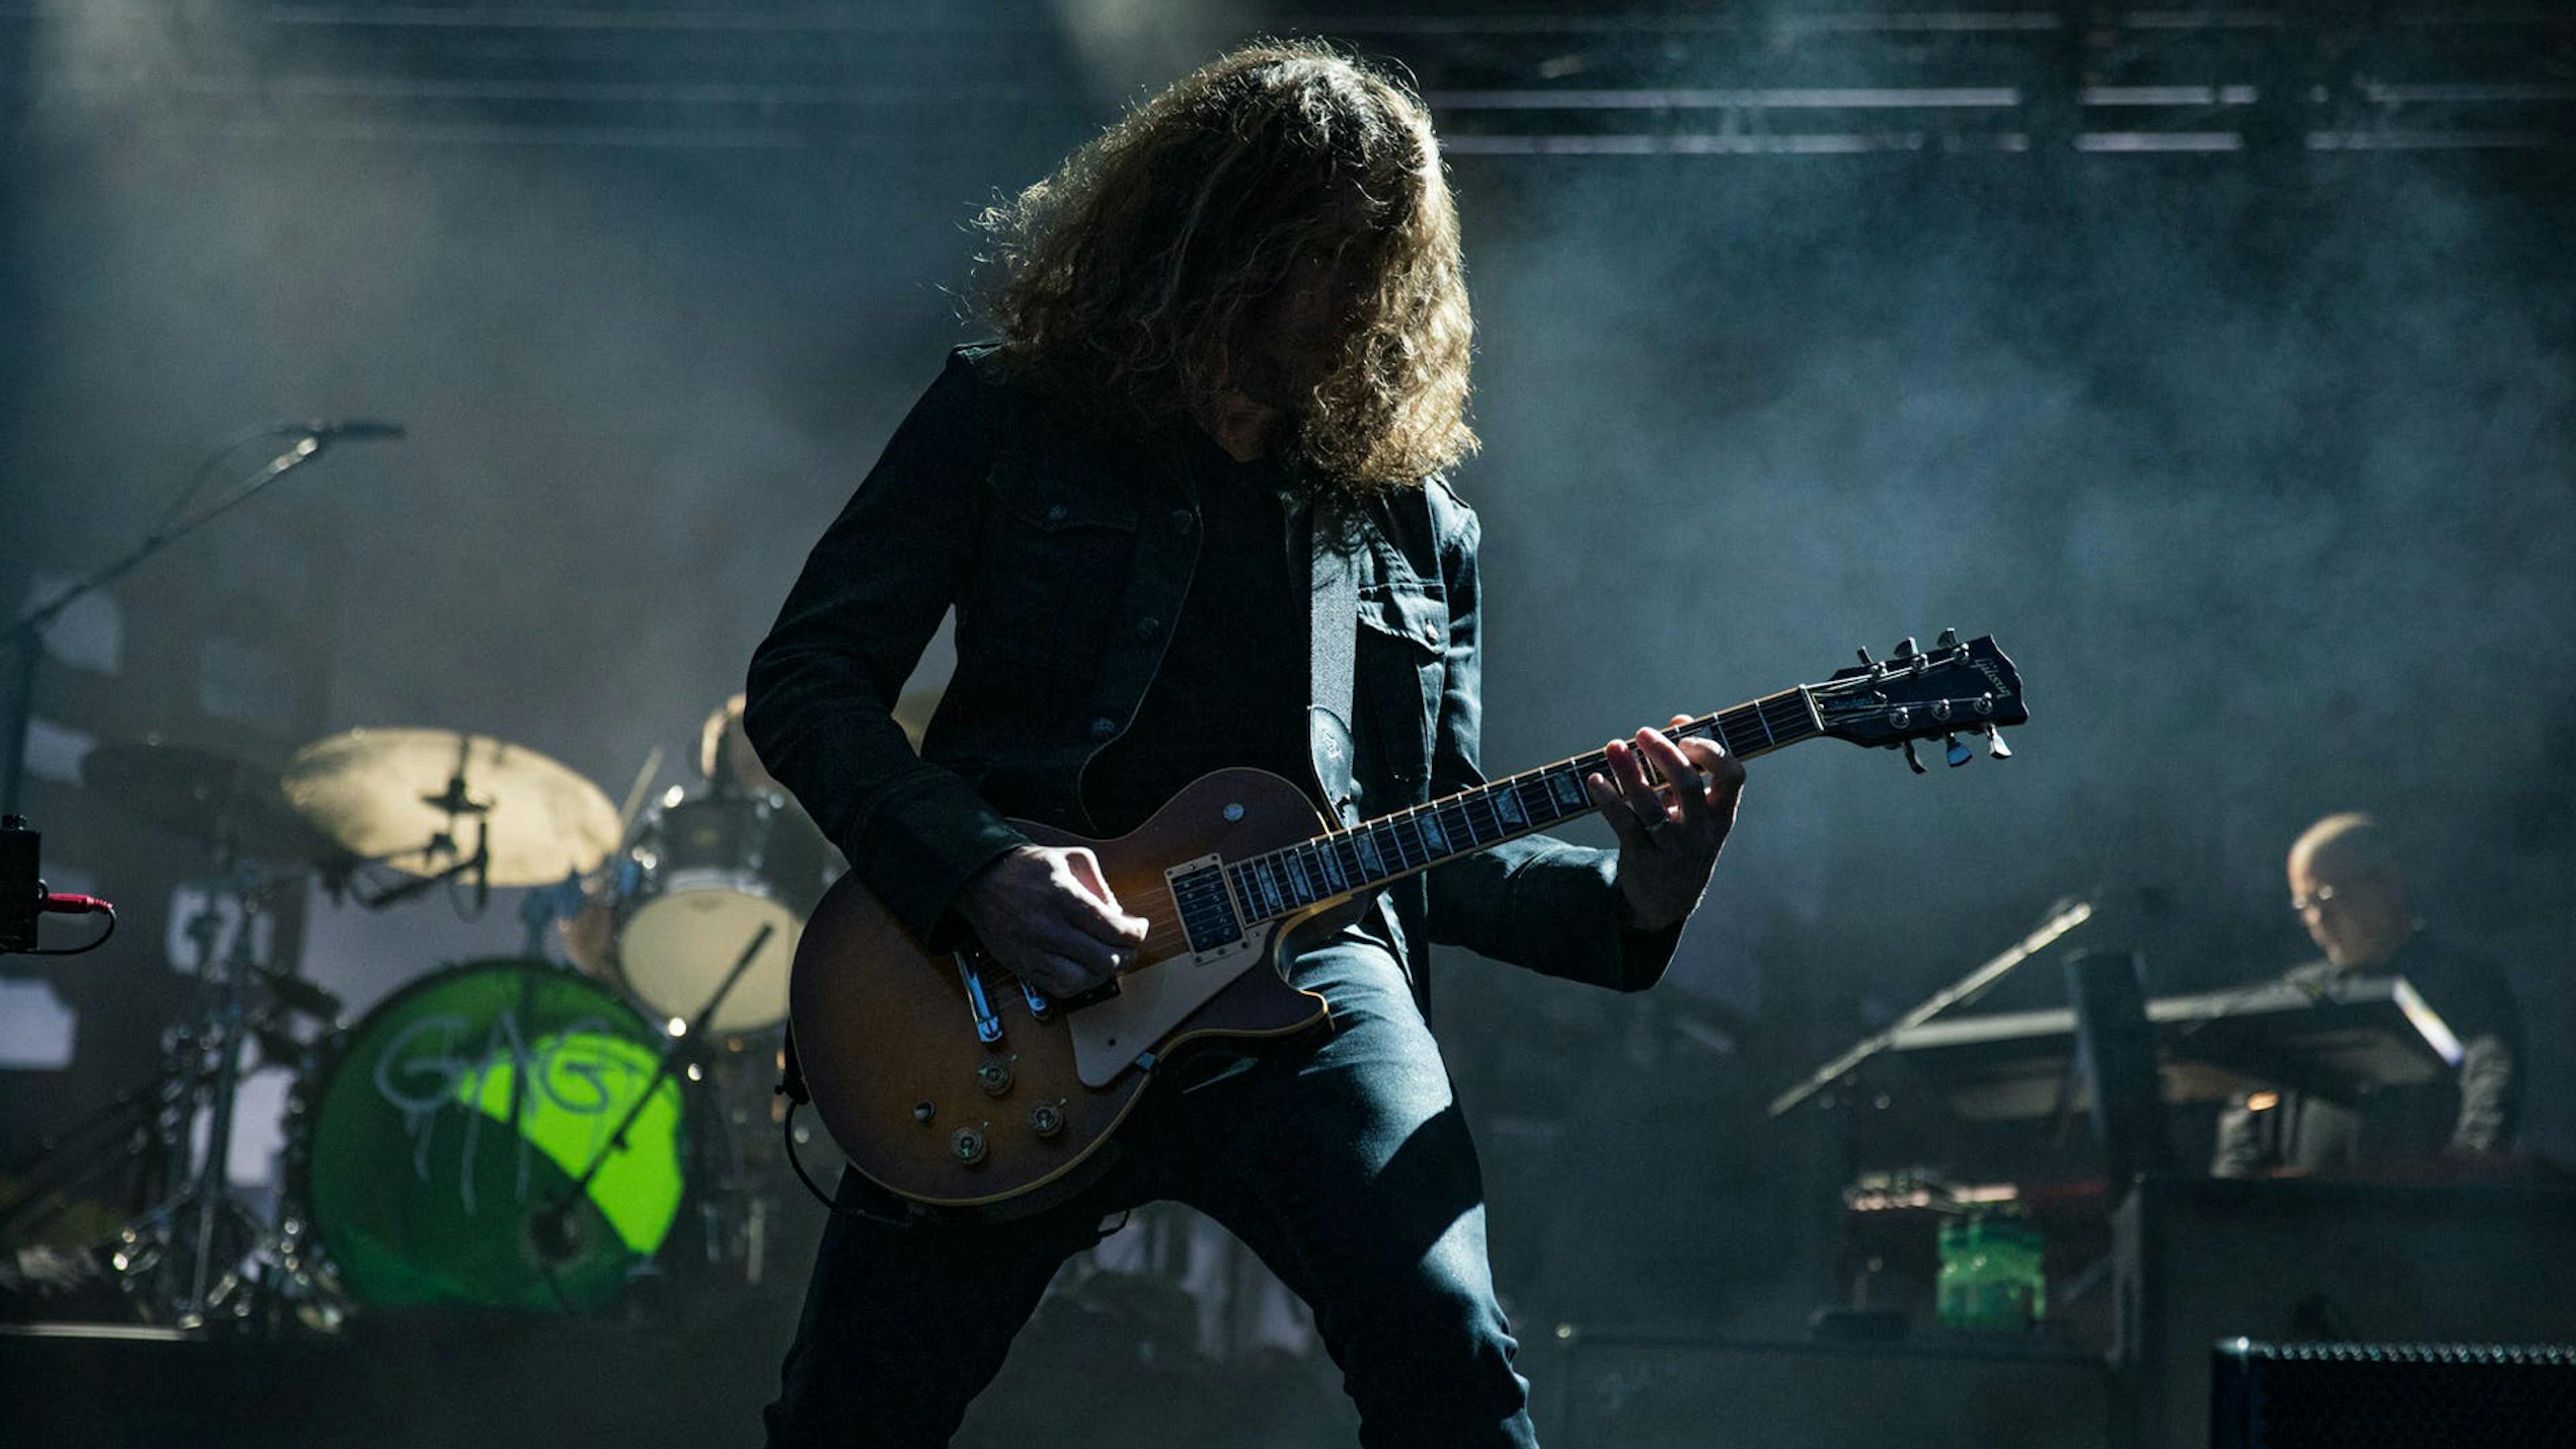 MCR’s Ray Toro shares epic Our Lady Of Sorrows live audio